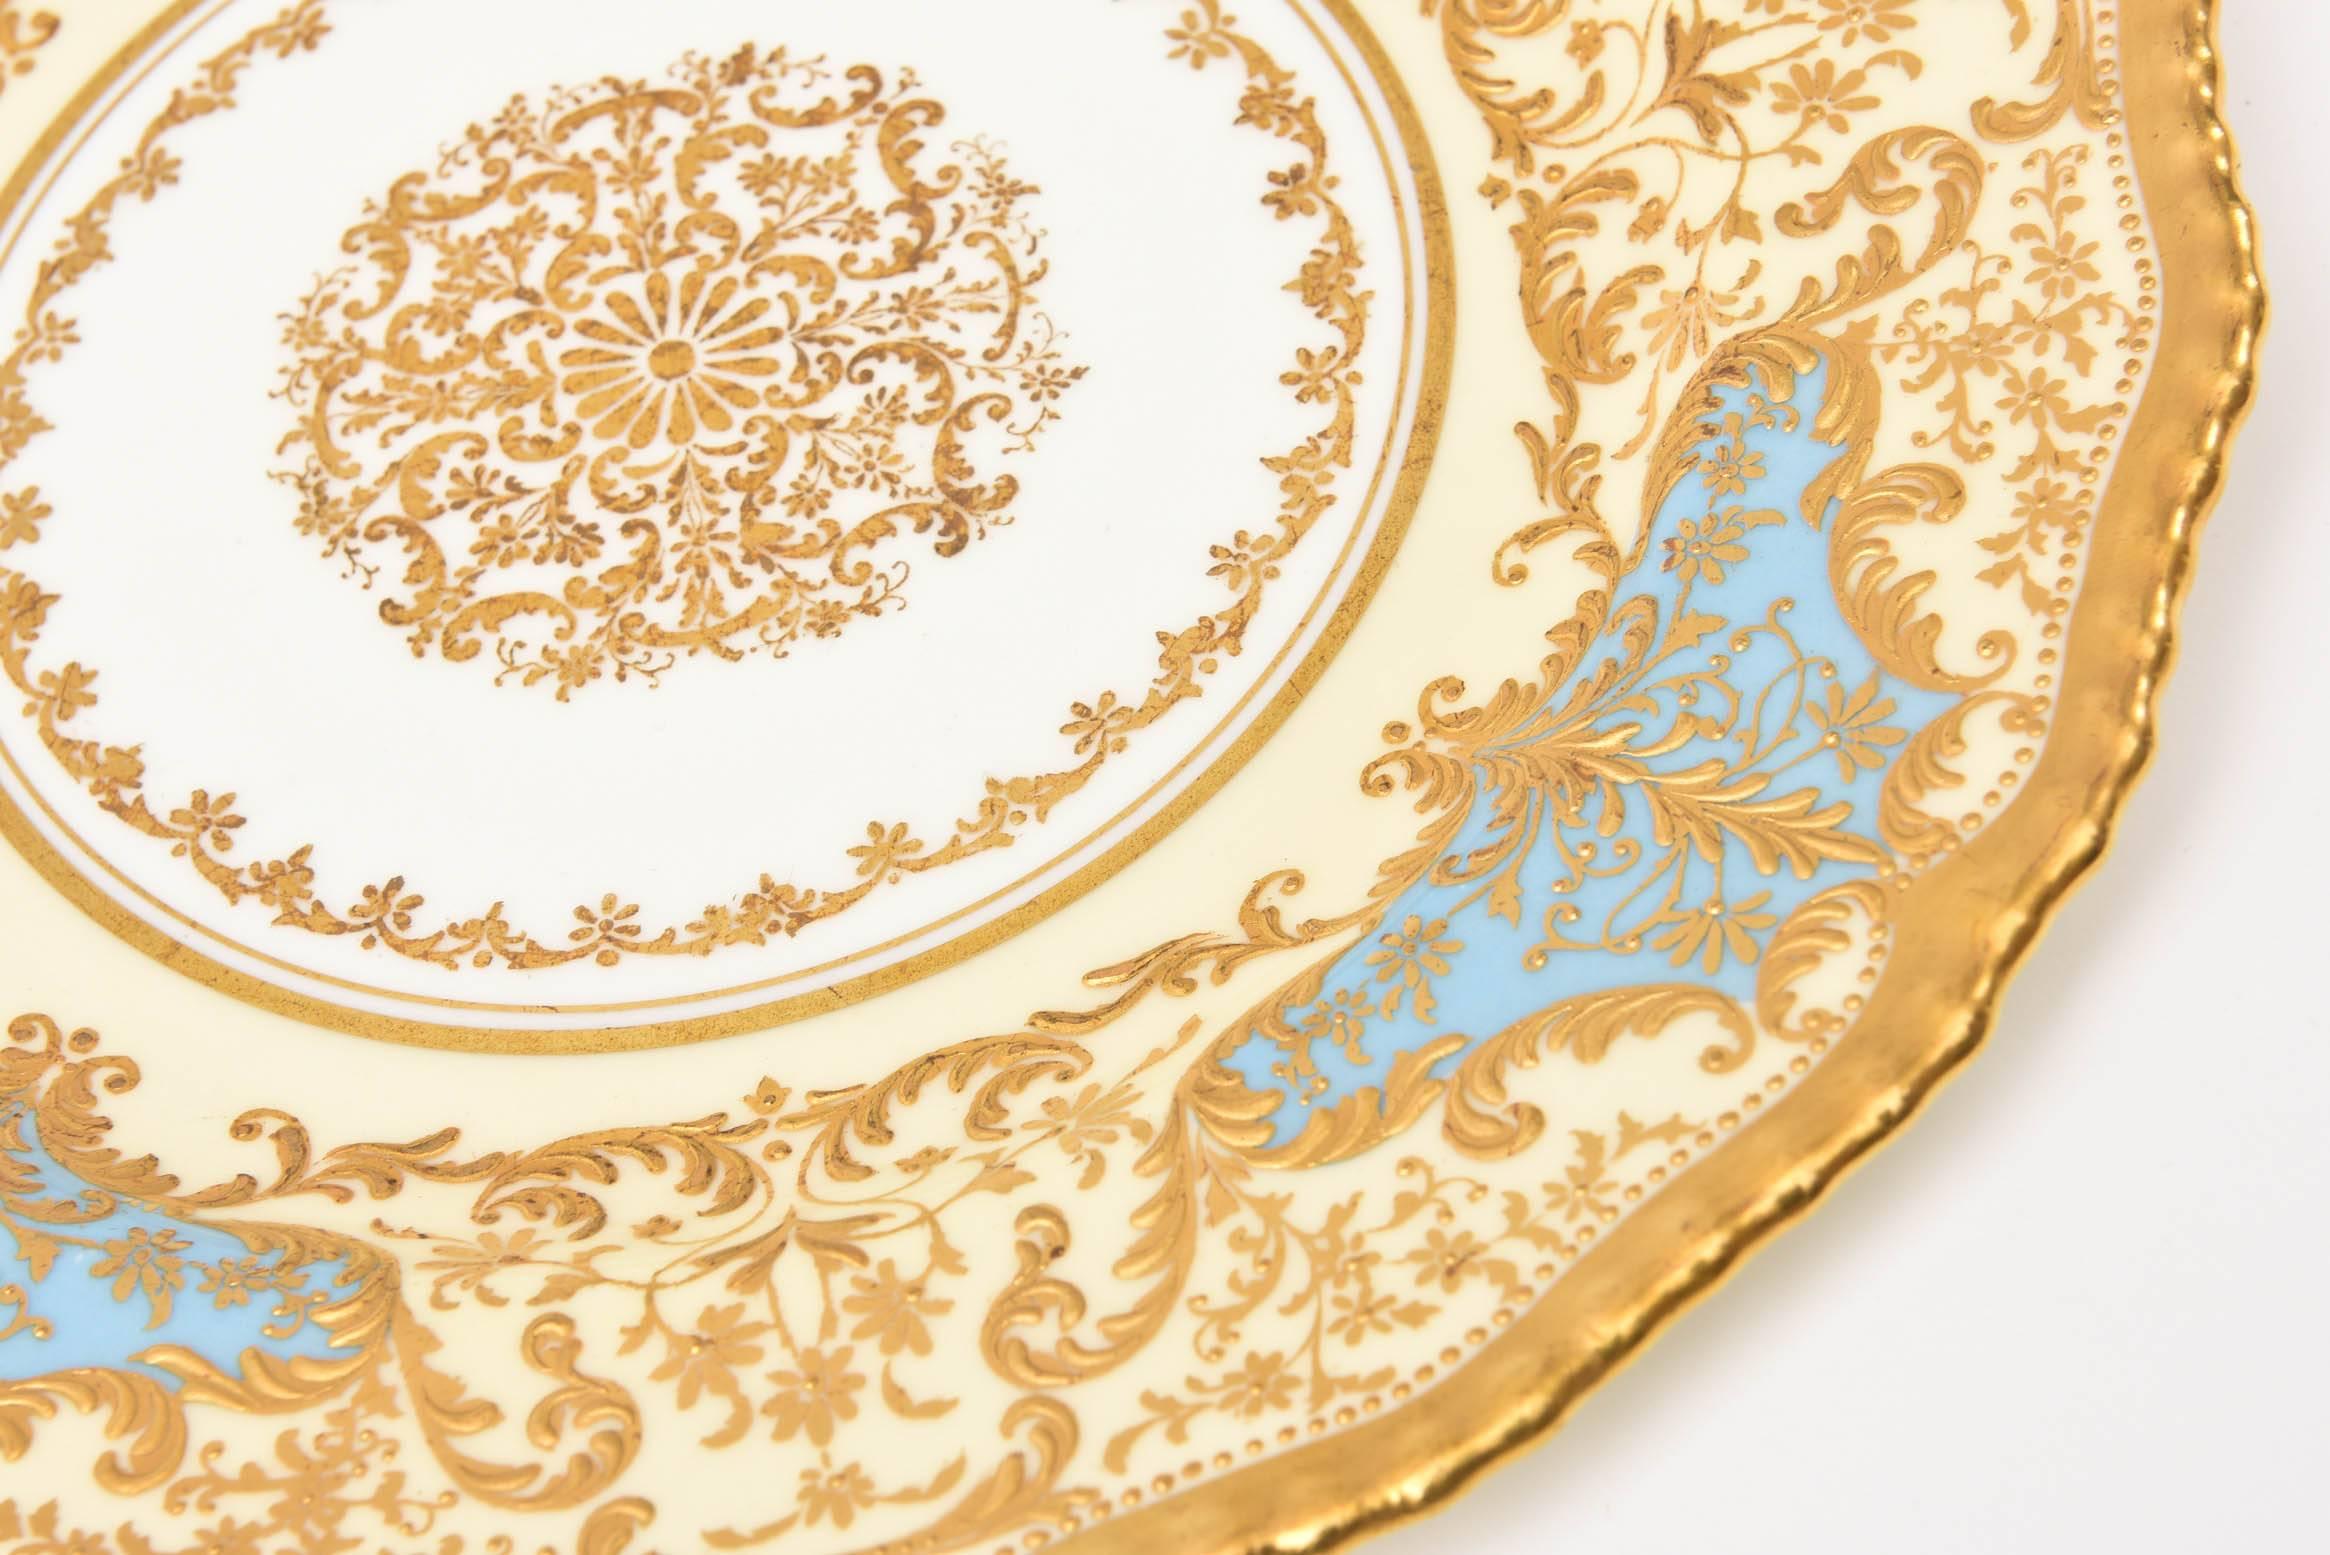 Early 20th Century 12 Exquisite Turquoise Gilt Encrusted Dessert Plates, Antique English circa 1910